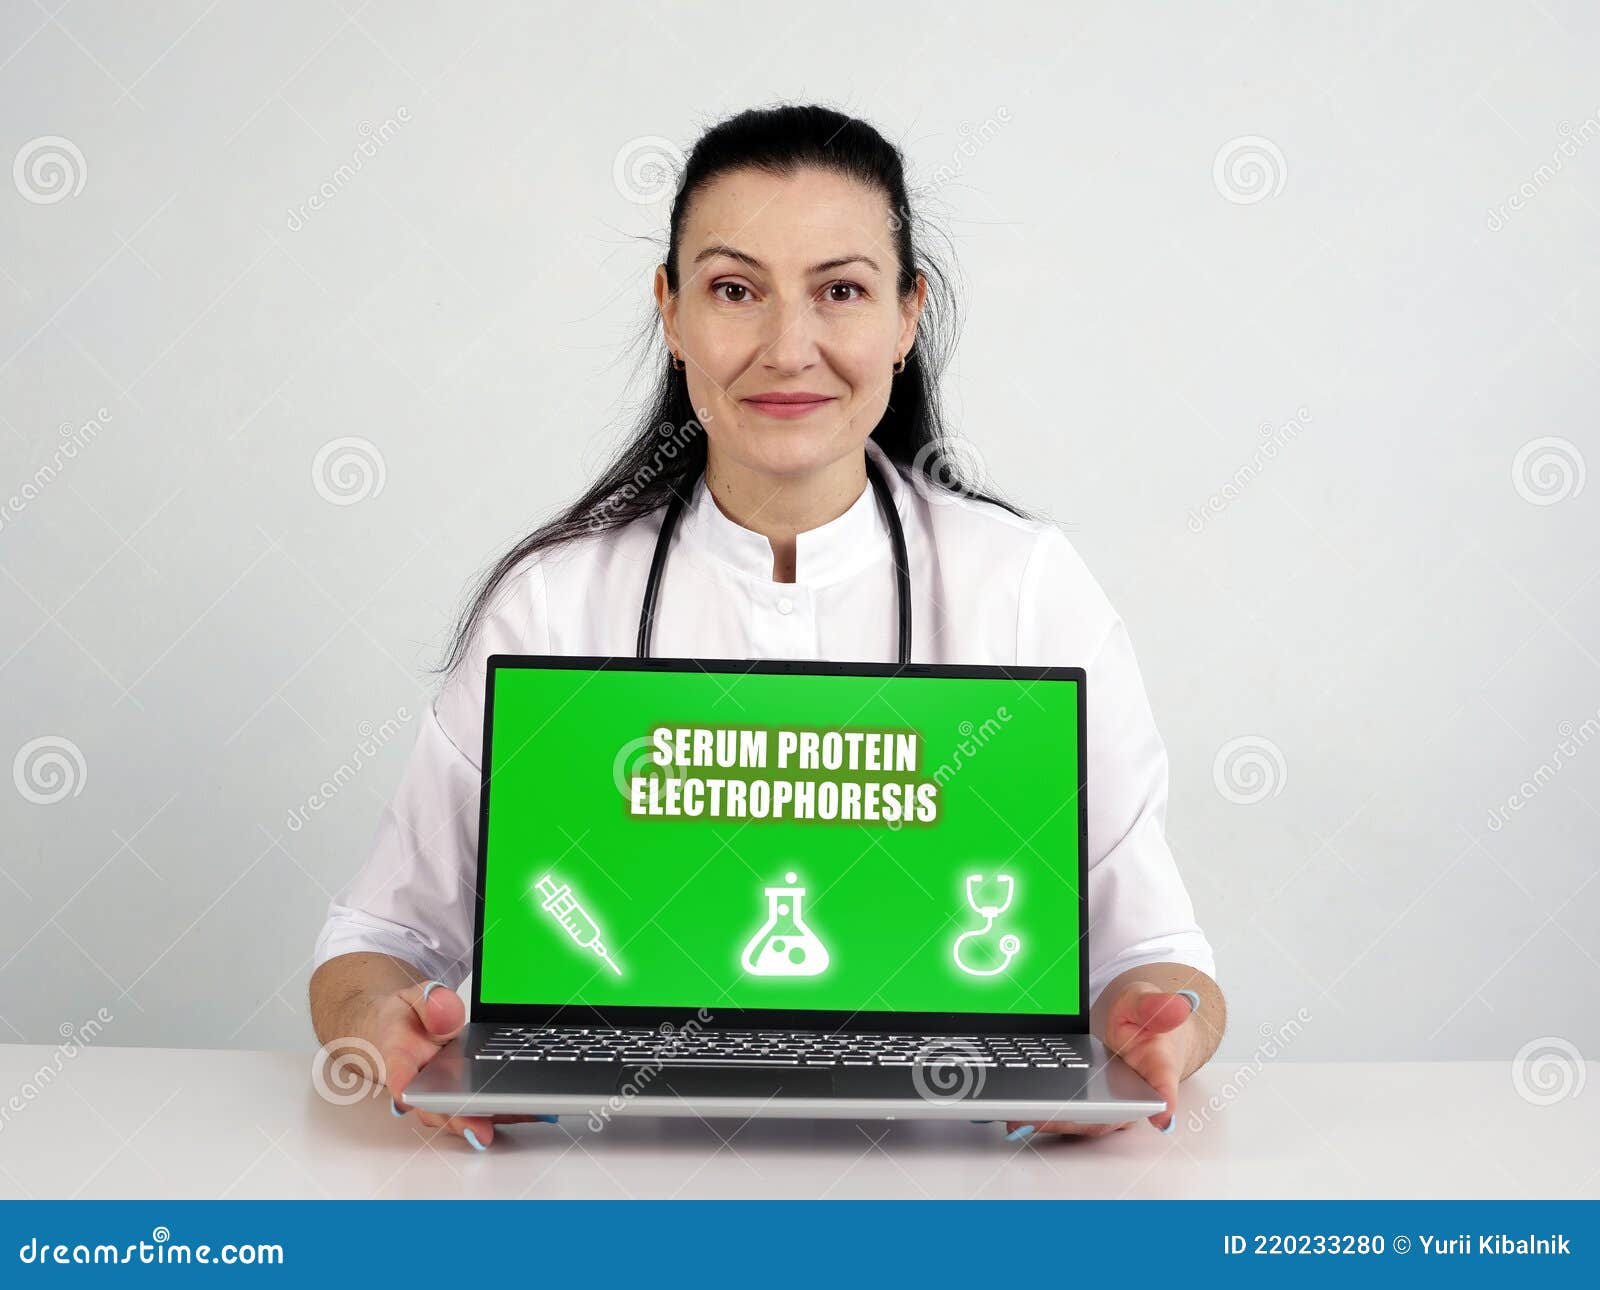 serum protein electrophoresis spe text in search bar. internistlooking for something at laptop